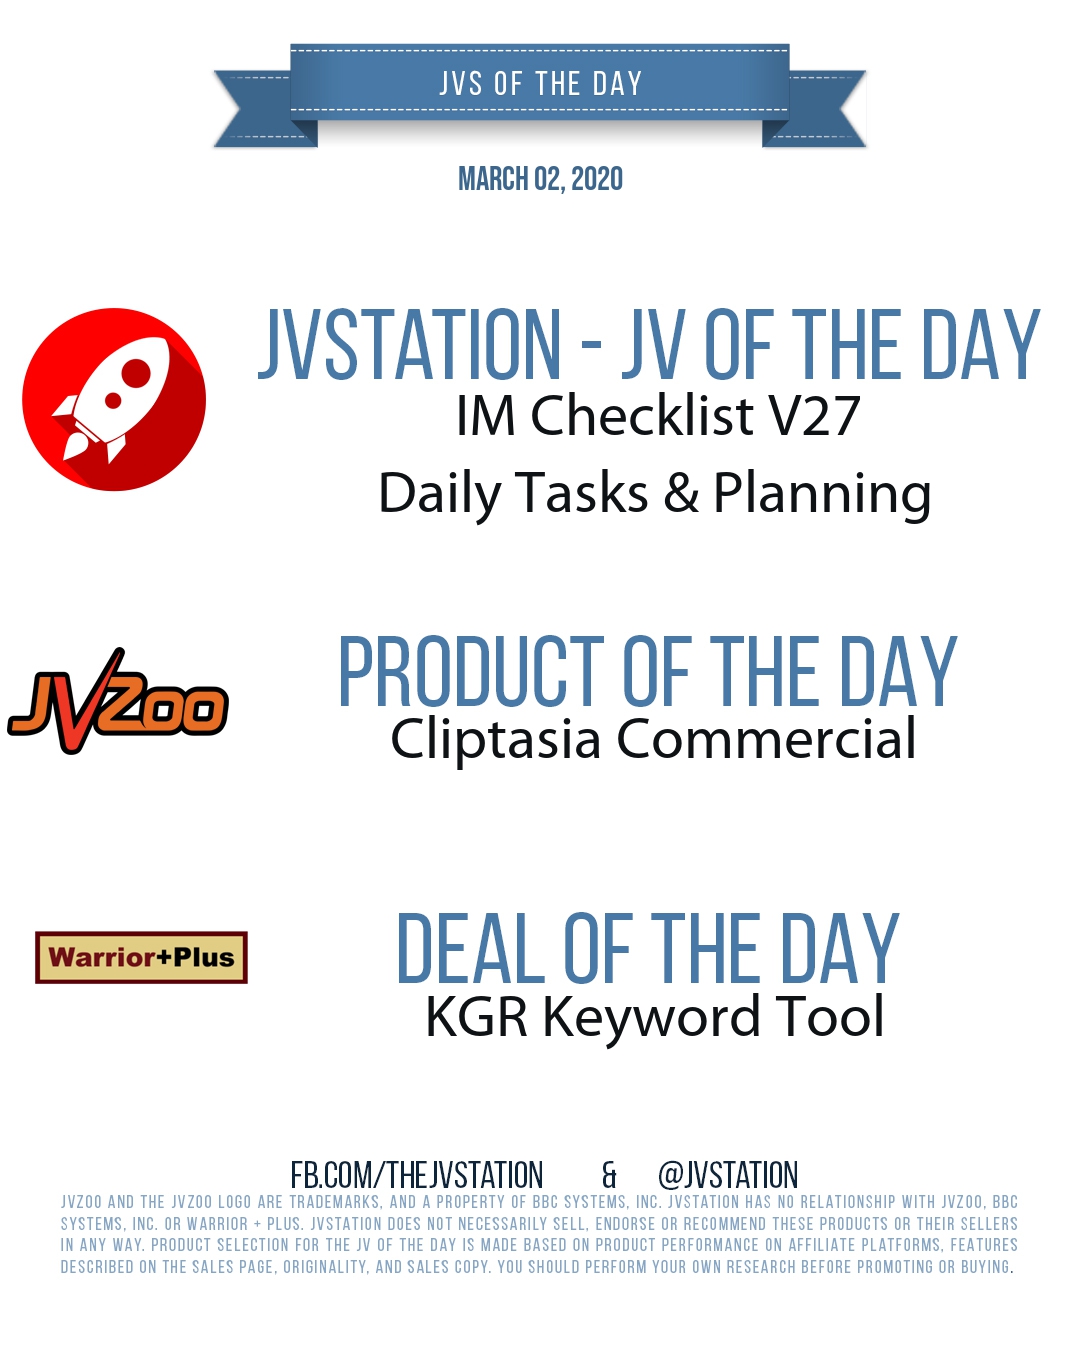 JVs of the day - March 02, 2020